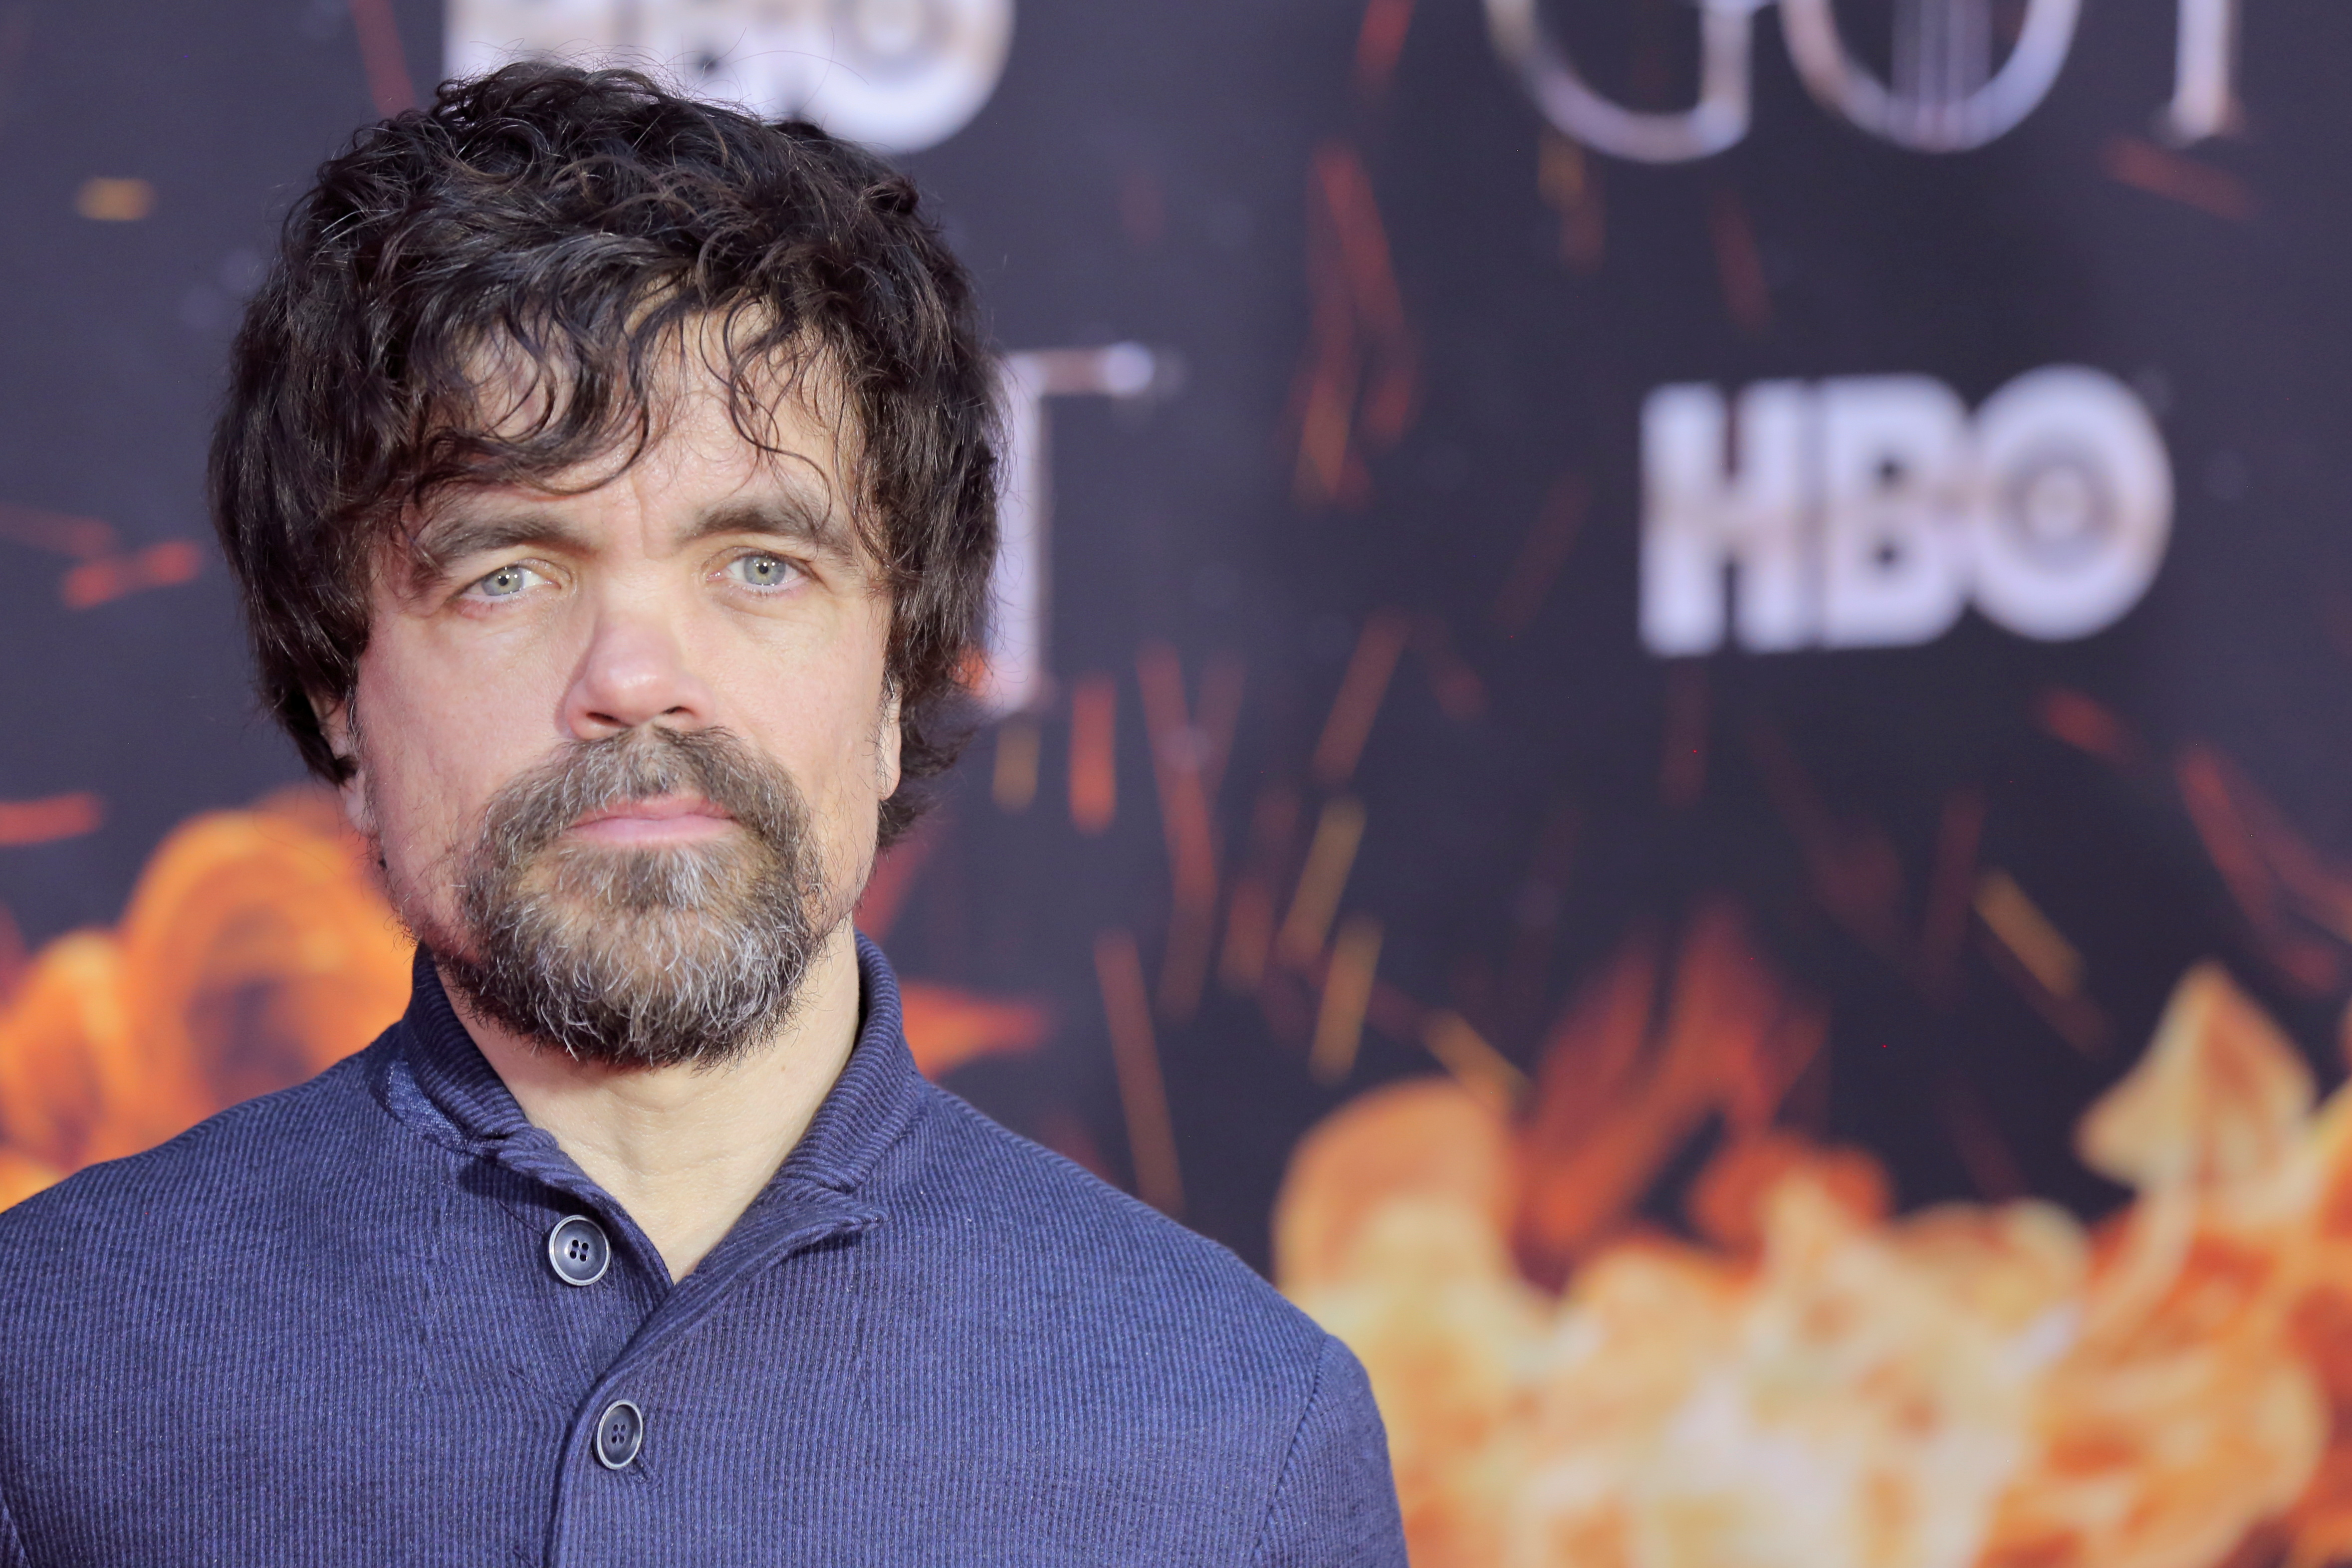 Peter Dinklage arrives for the premiere of the final season of 